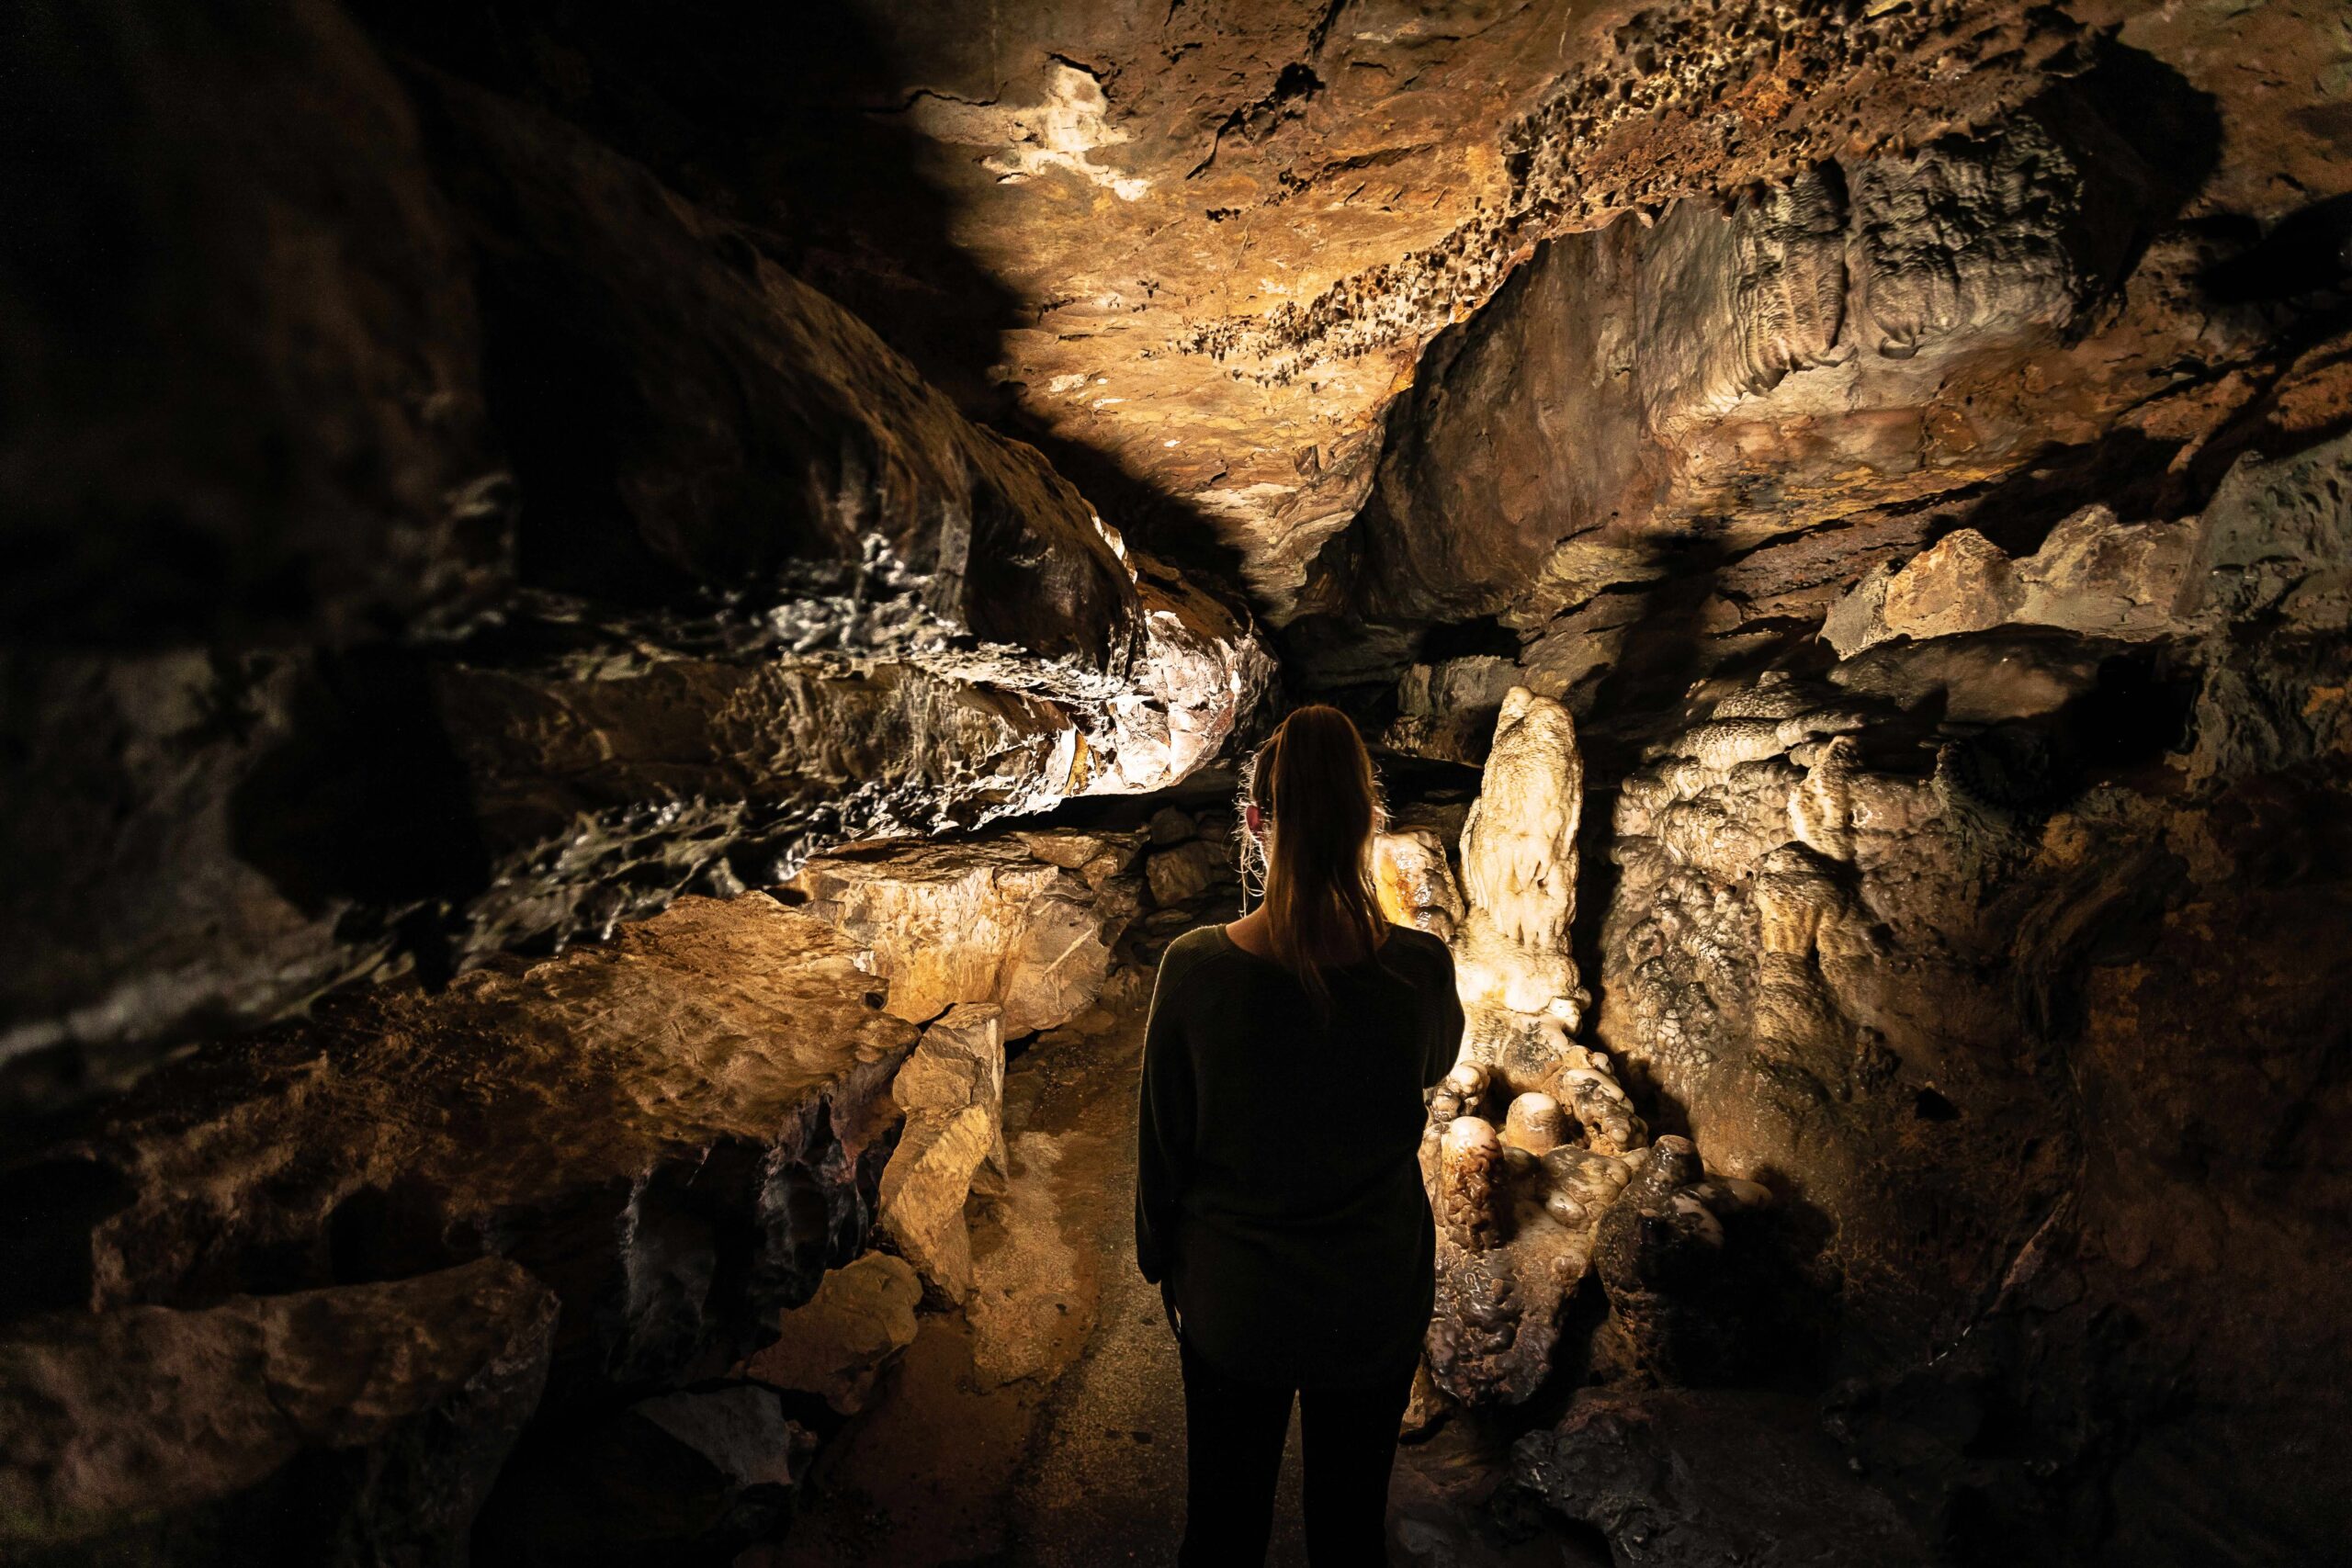 A woman is seen from behind holding a lantern, illuminating the cave in front of her